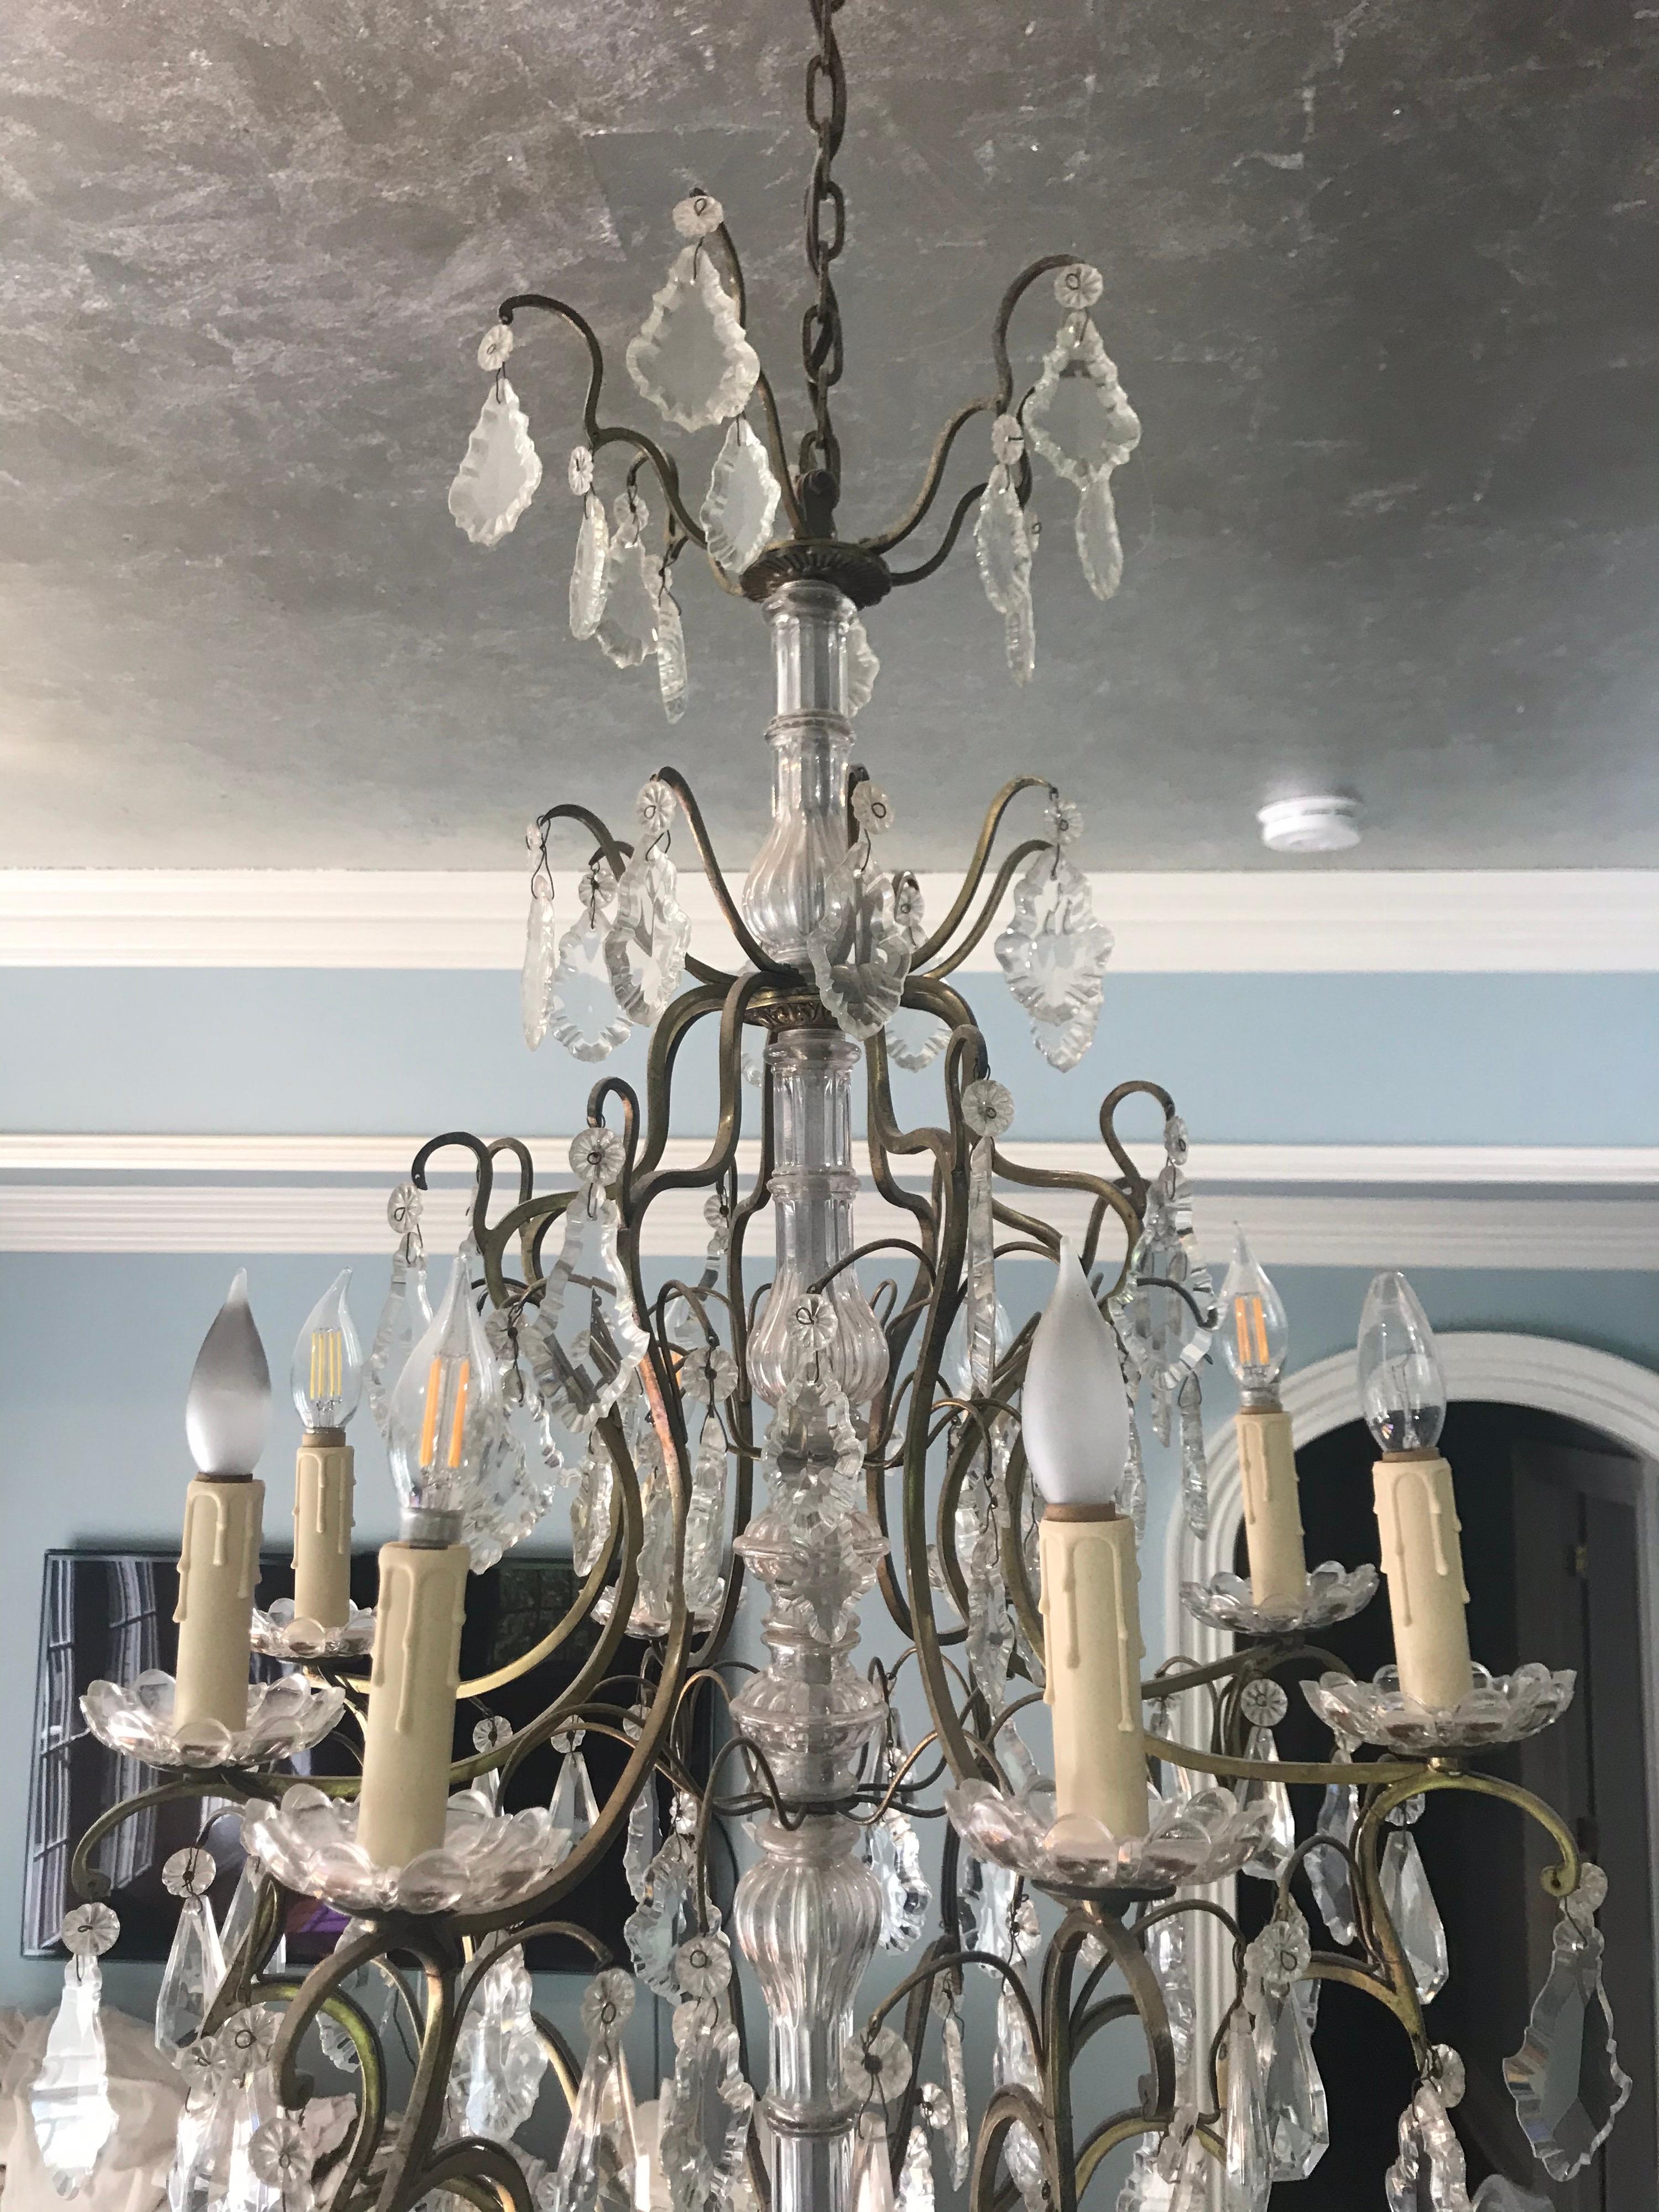 Gorgeous early 19th century French Louis XVI style finely cut crystal and bronze gilt eight-light chandelier with unique cut crystal center shaft. This chandelier will add elegance to any room.